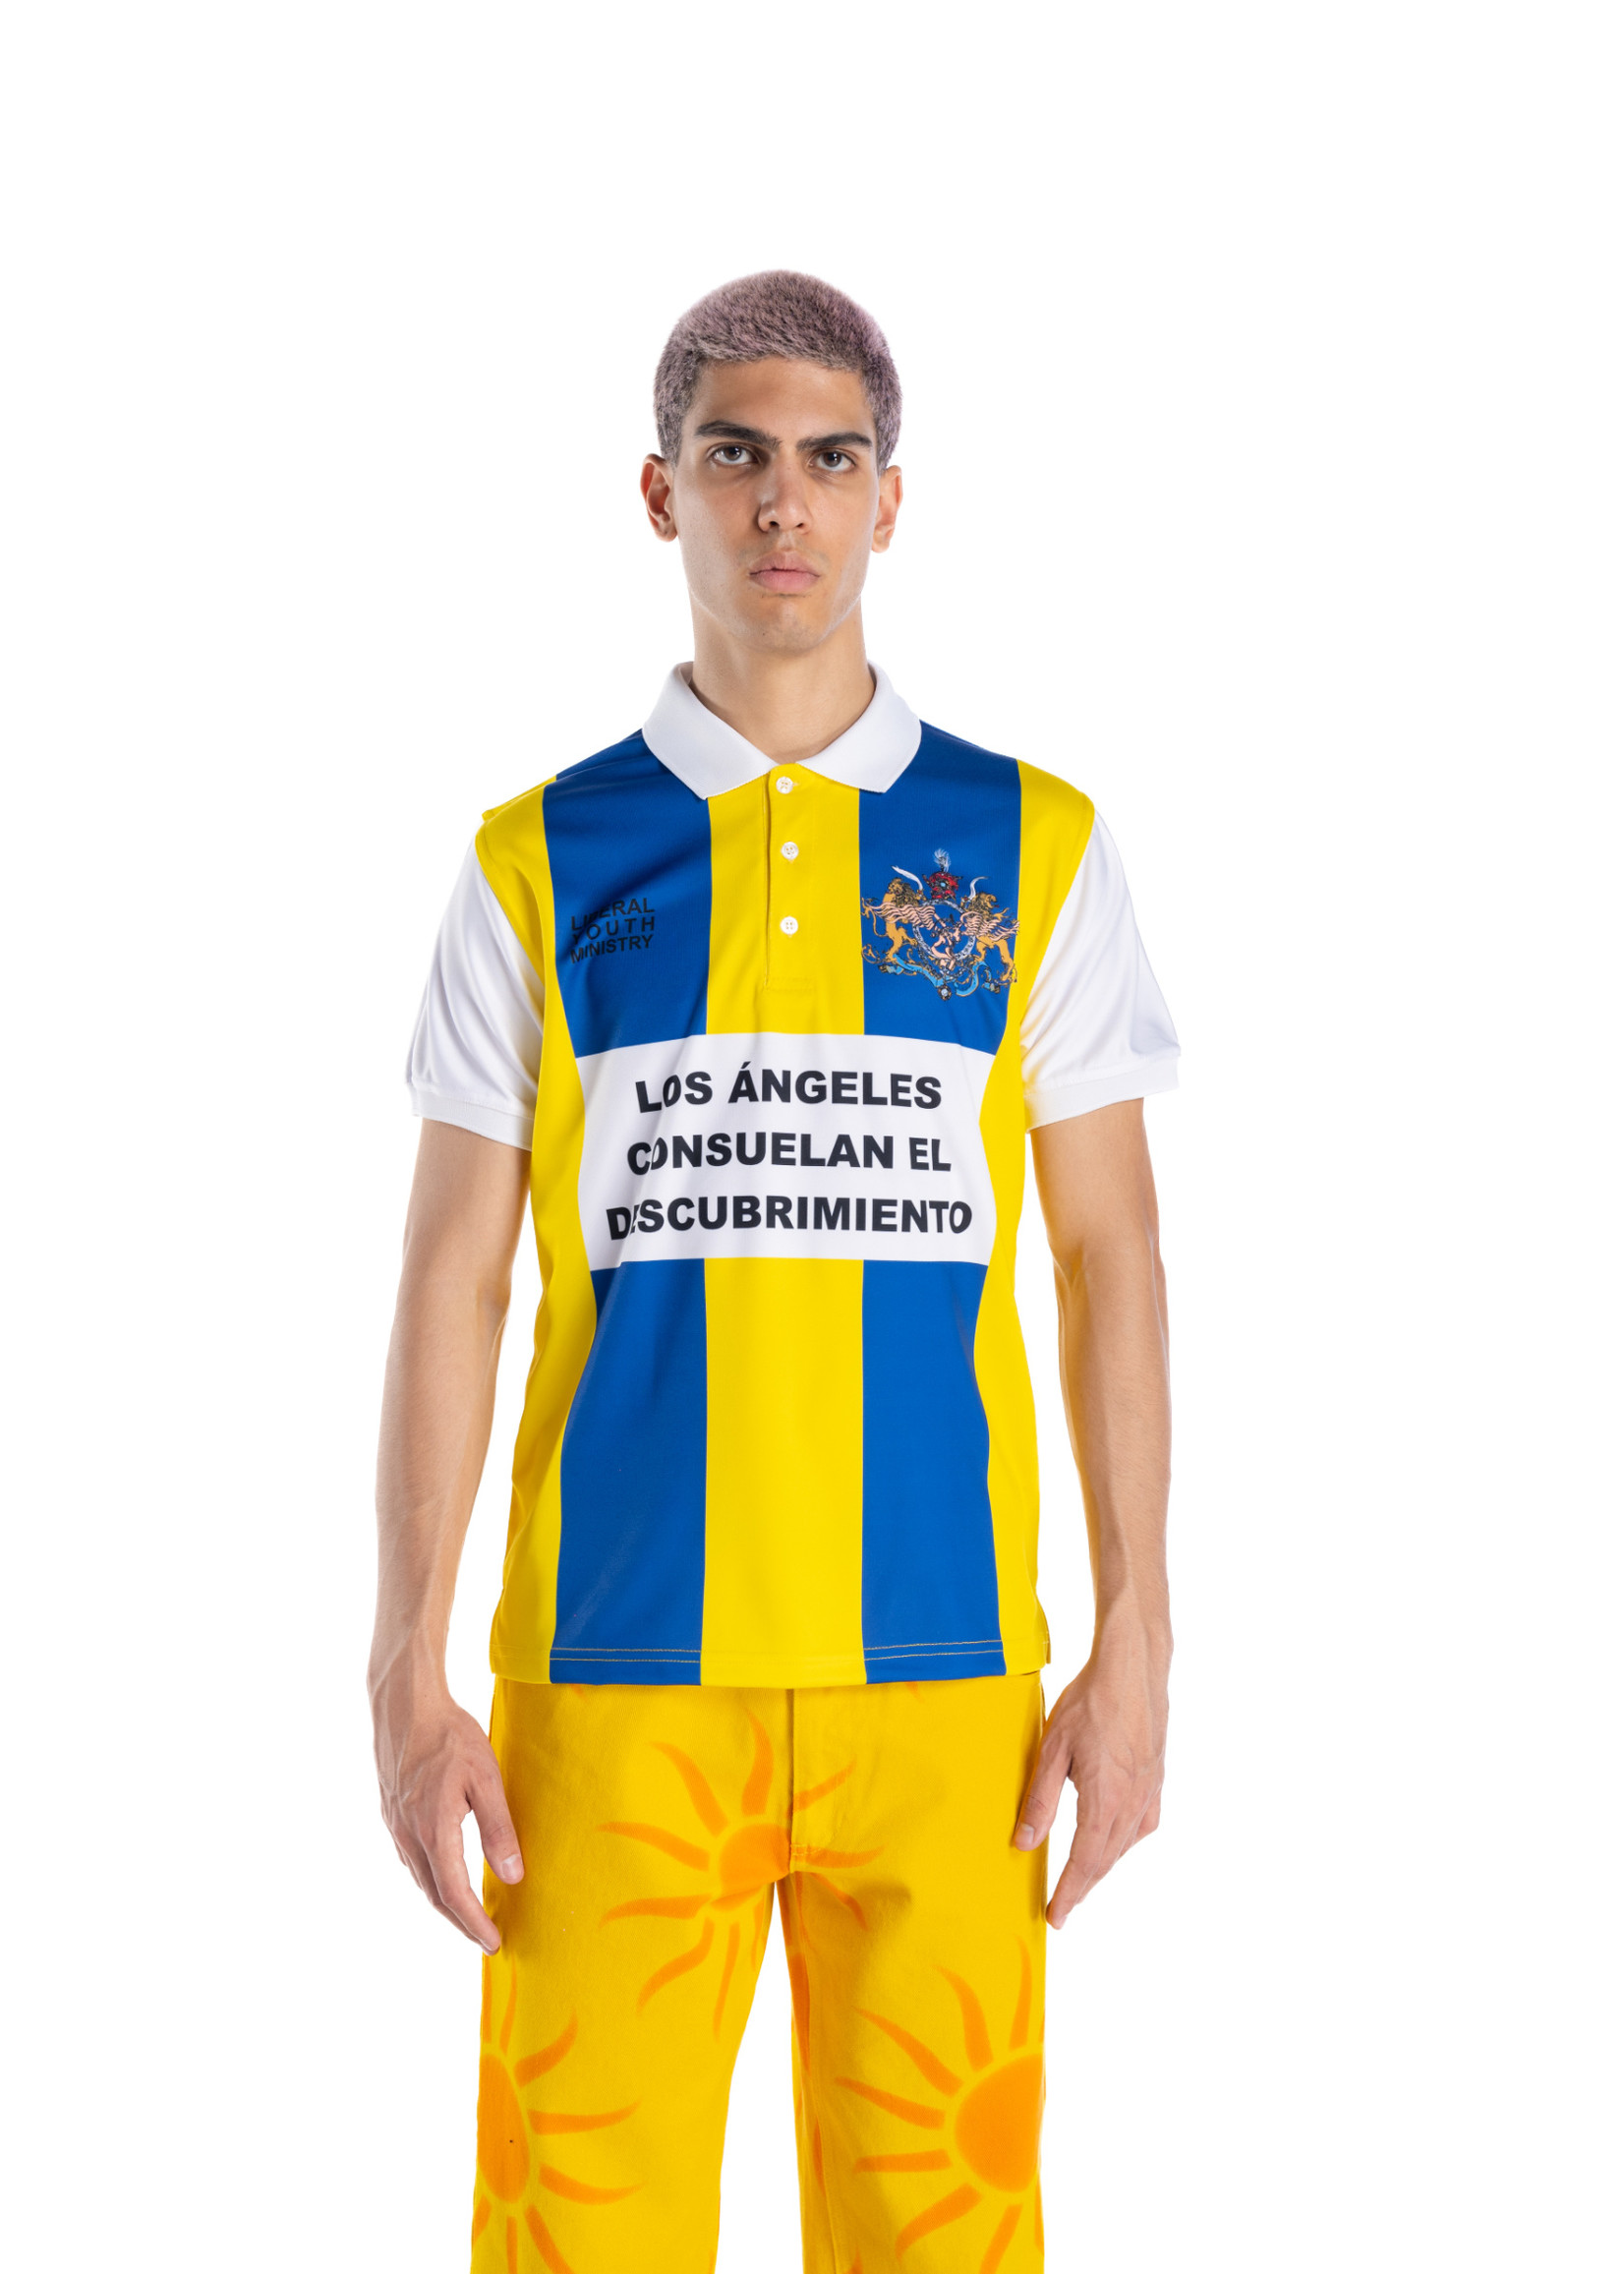 LIBERAL YOUTH MINISTRY FOOTBALL POLO JERSEY IN Blue and Yellow